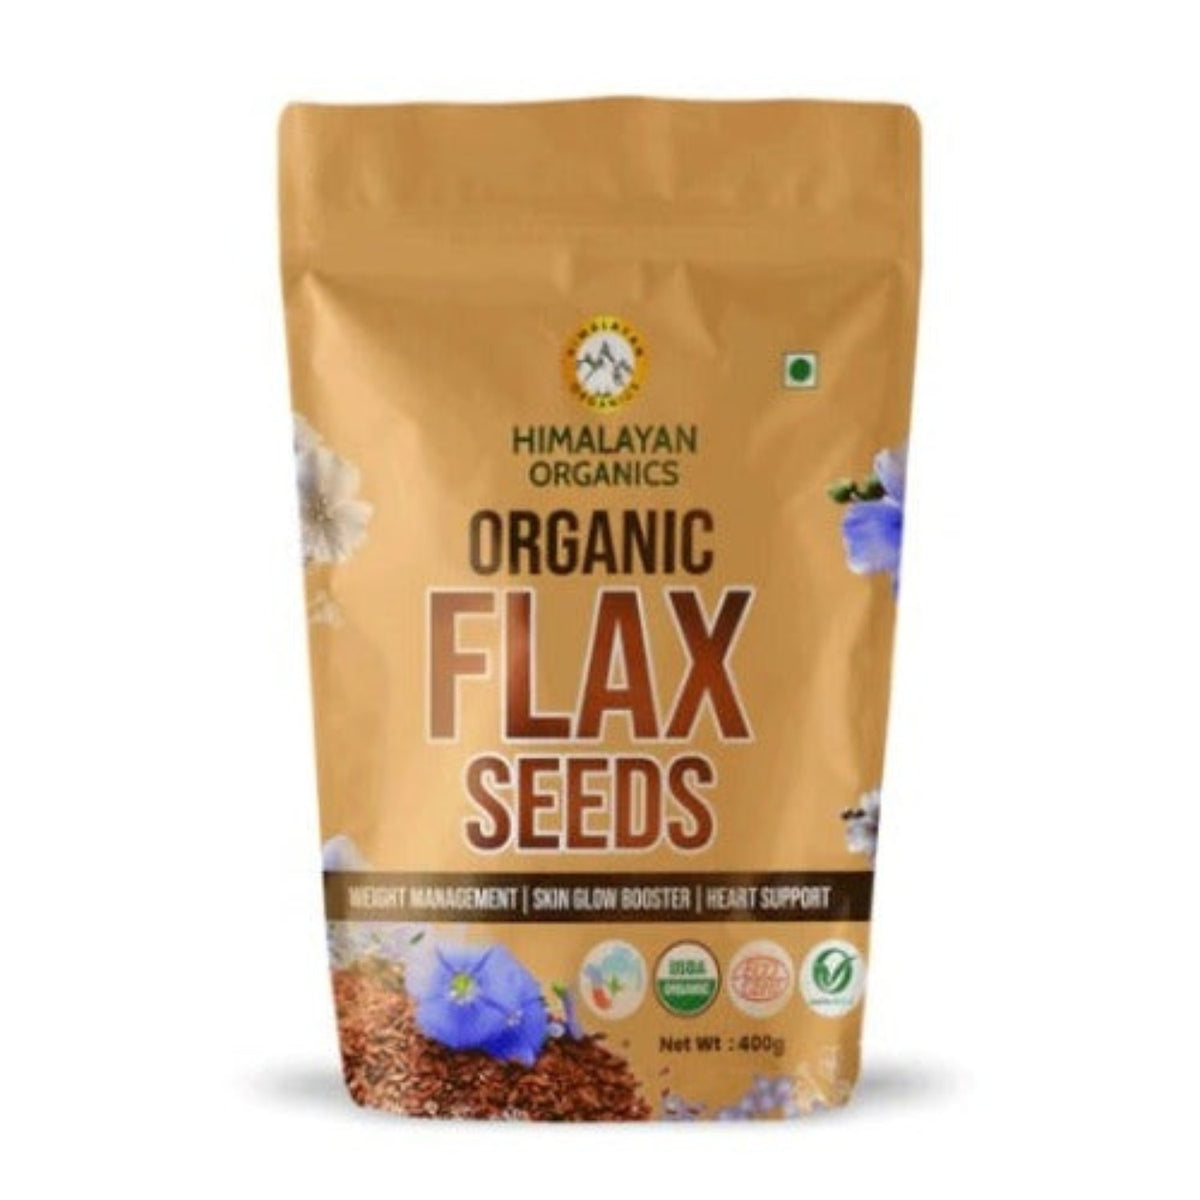 Himalayan Organics Certified Organic Flax Seeds Enriched with Omega 3 & Zinc for Healthy Weight Management & Supports Heart Health 400g